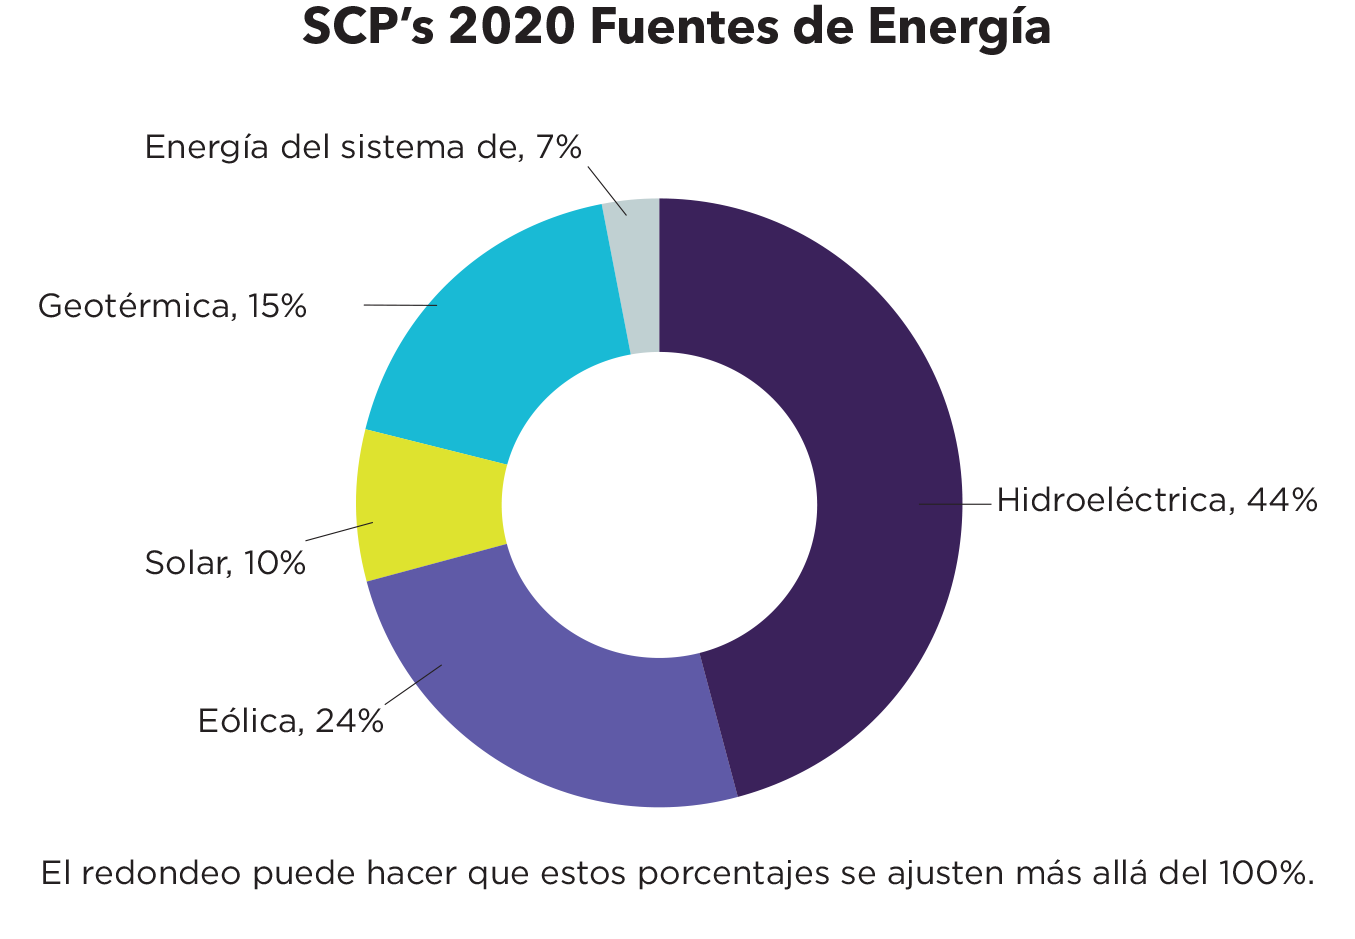 SC Ps 2020 Power Sources Spanish Clean Start